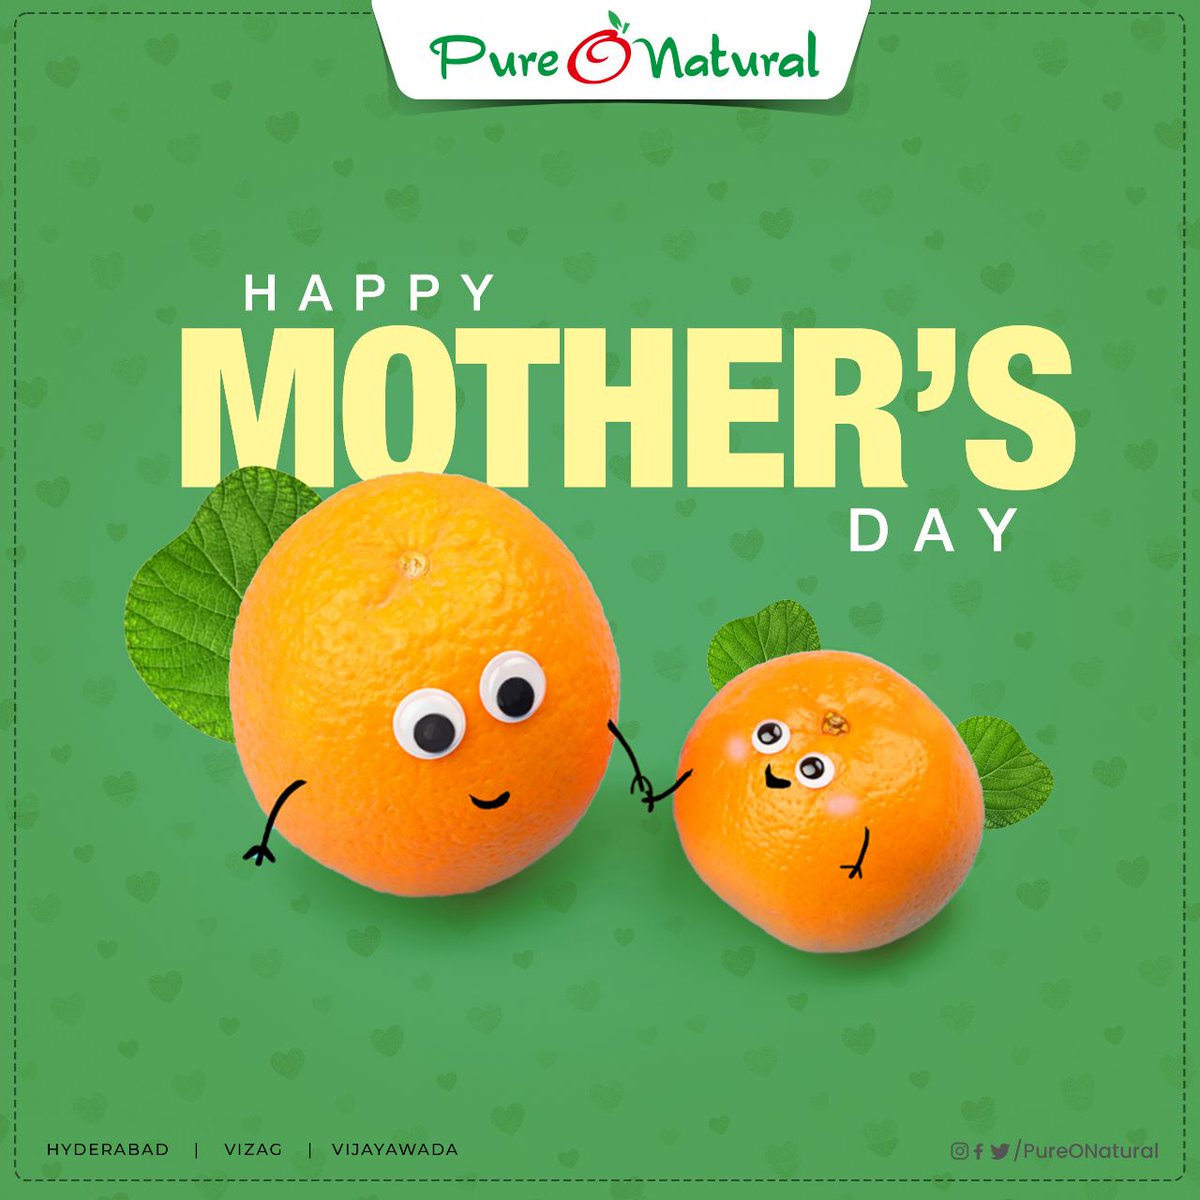 Life doesn't come with a manual, but it comes with a mother! 😍  Happy Mother's Day 👩💝💐

Experience purity of mother's nature with PureONatural! 

#mom #happymothersday #mother #happymothersday2023 #mothersday2023 #pureonatural #hyderabad #vizag #vijaywada #farmfresh